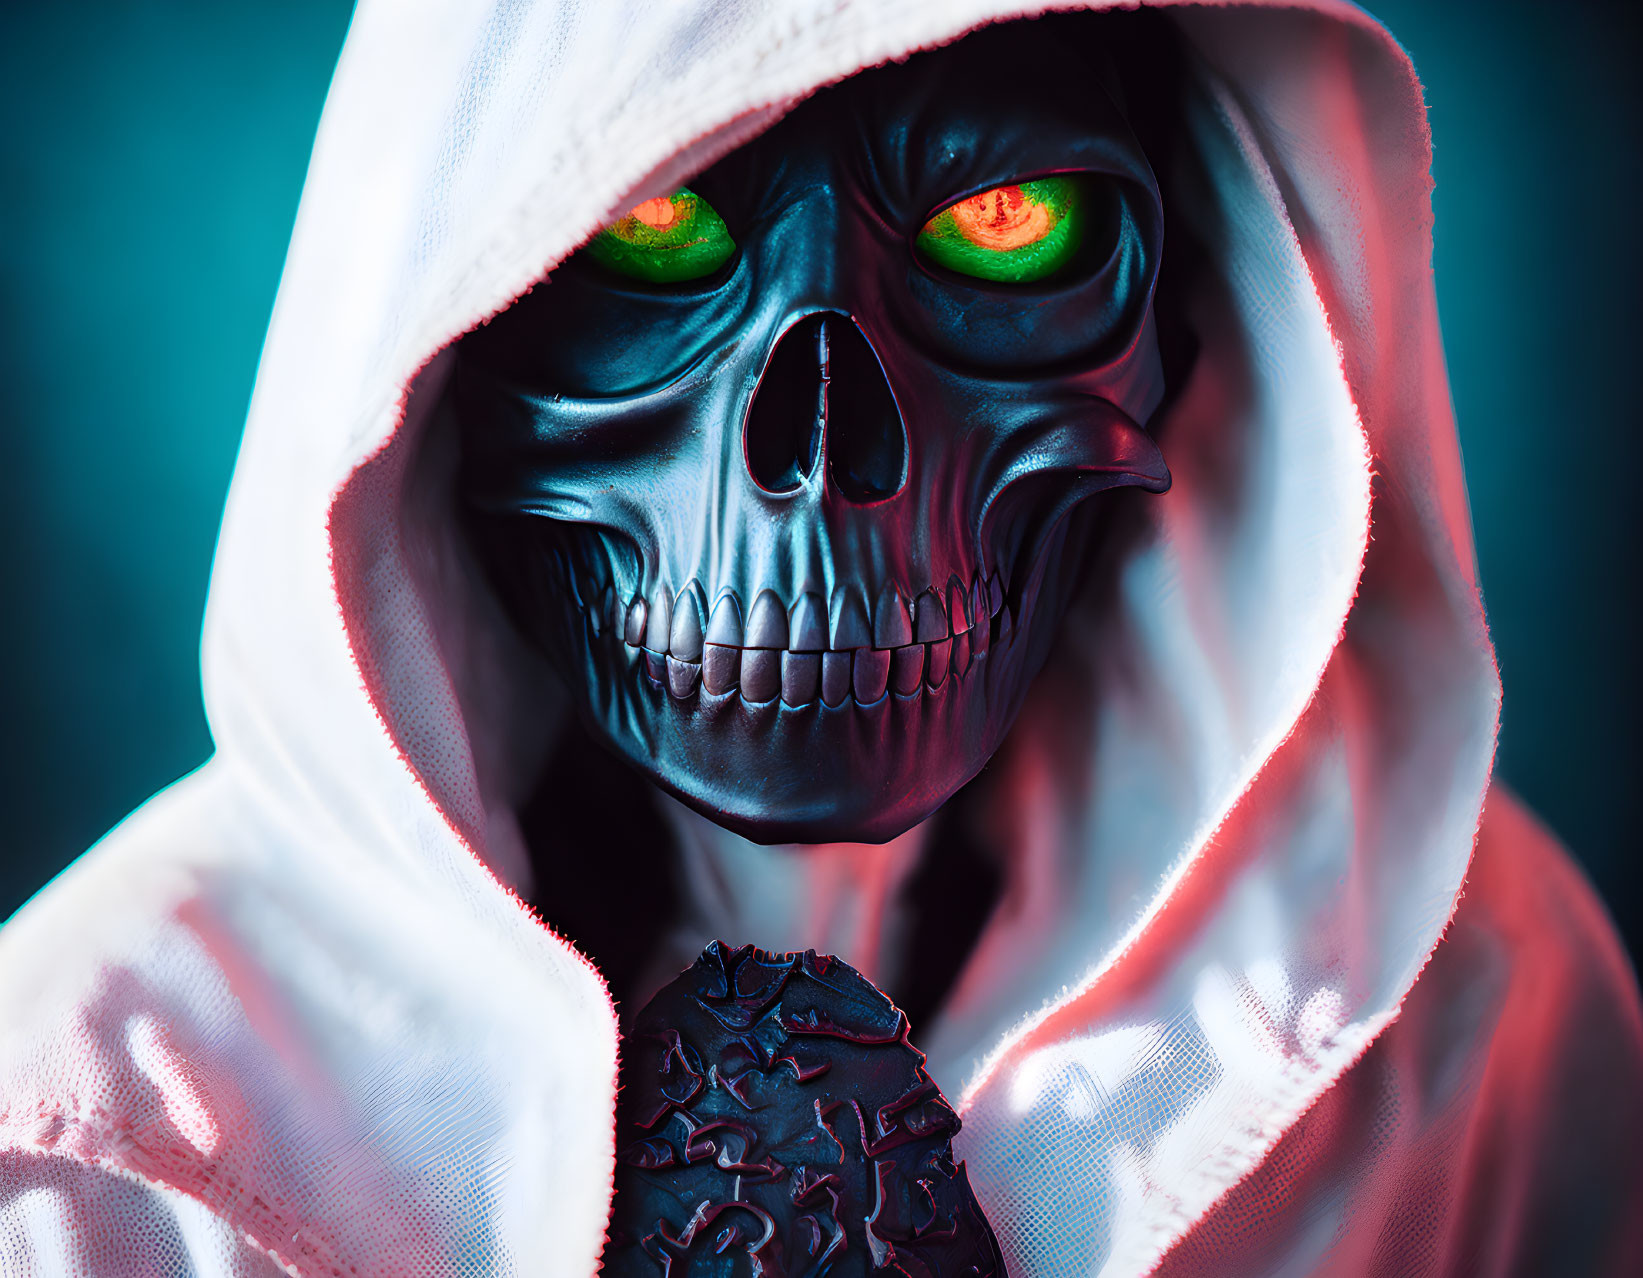 Skull mask with glowing green eyes on dark figure against vibrant background